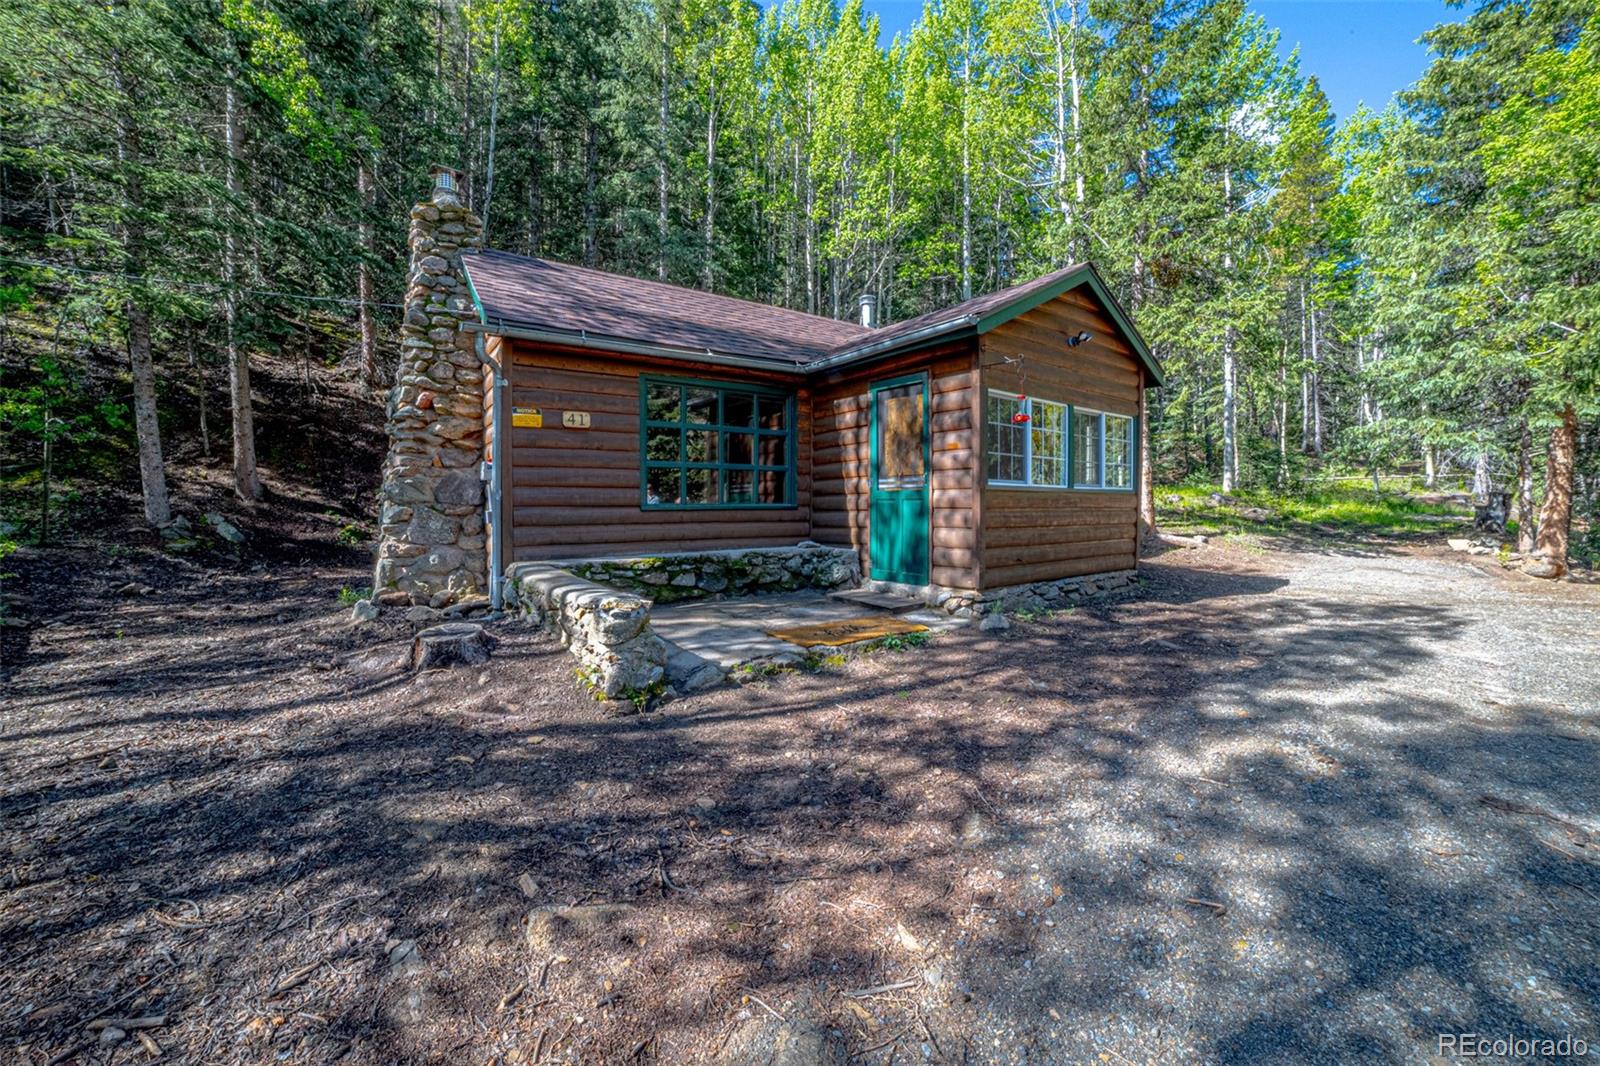 41  Forest Haven Lane, idaho springs MLS: 3702567 Beds: 1 Baths: 1 Price: $230,000